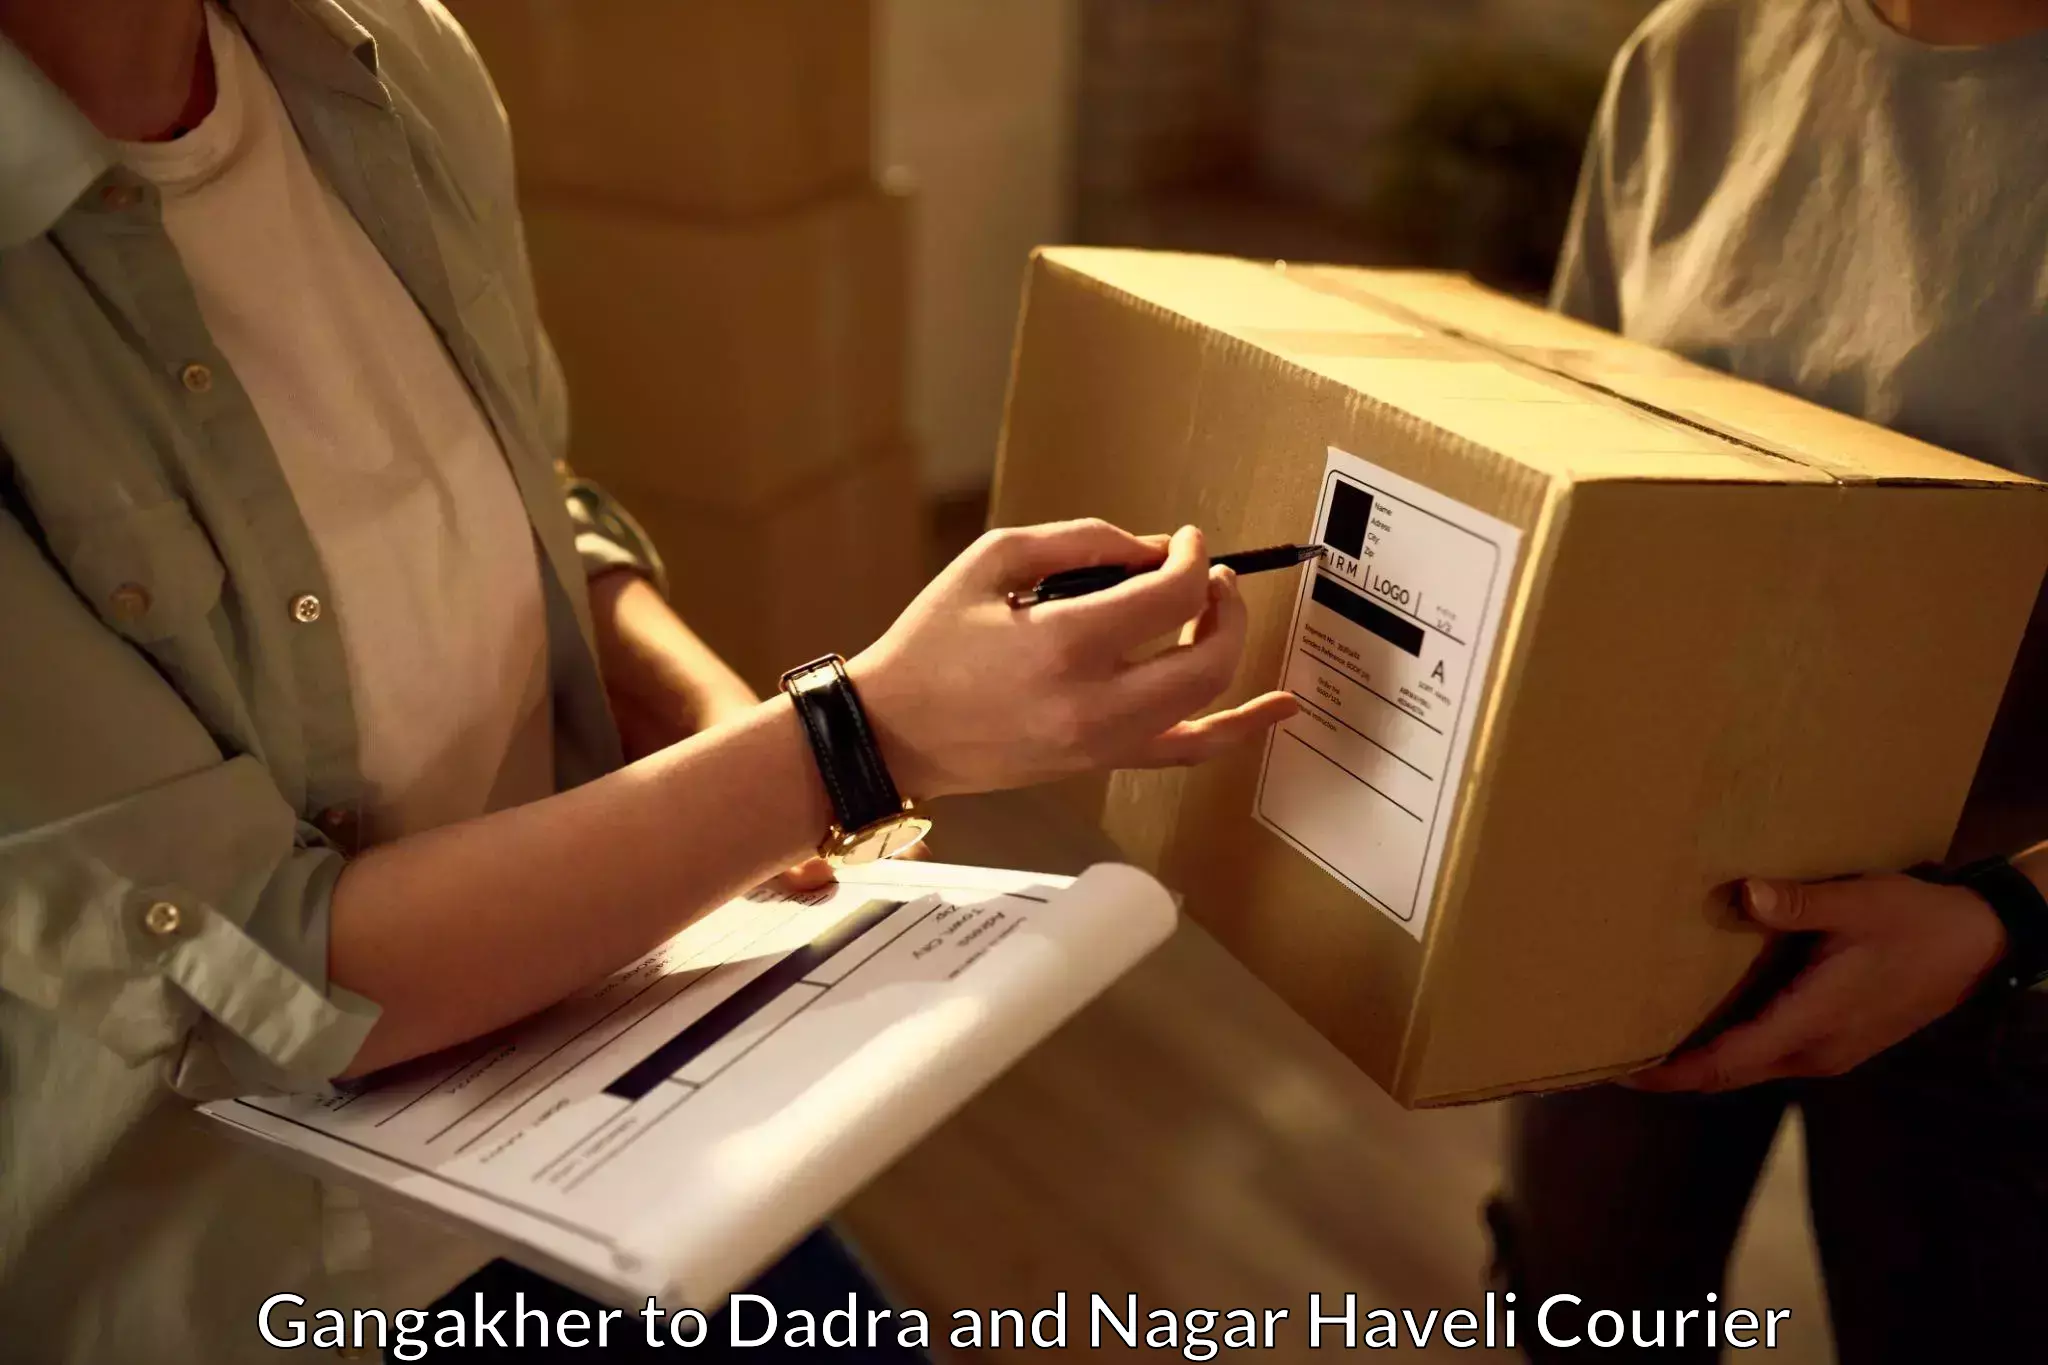 Advanced shipping technology in Gangakher to Dadra and Nagar Haveli